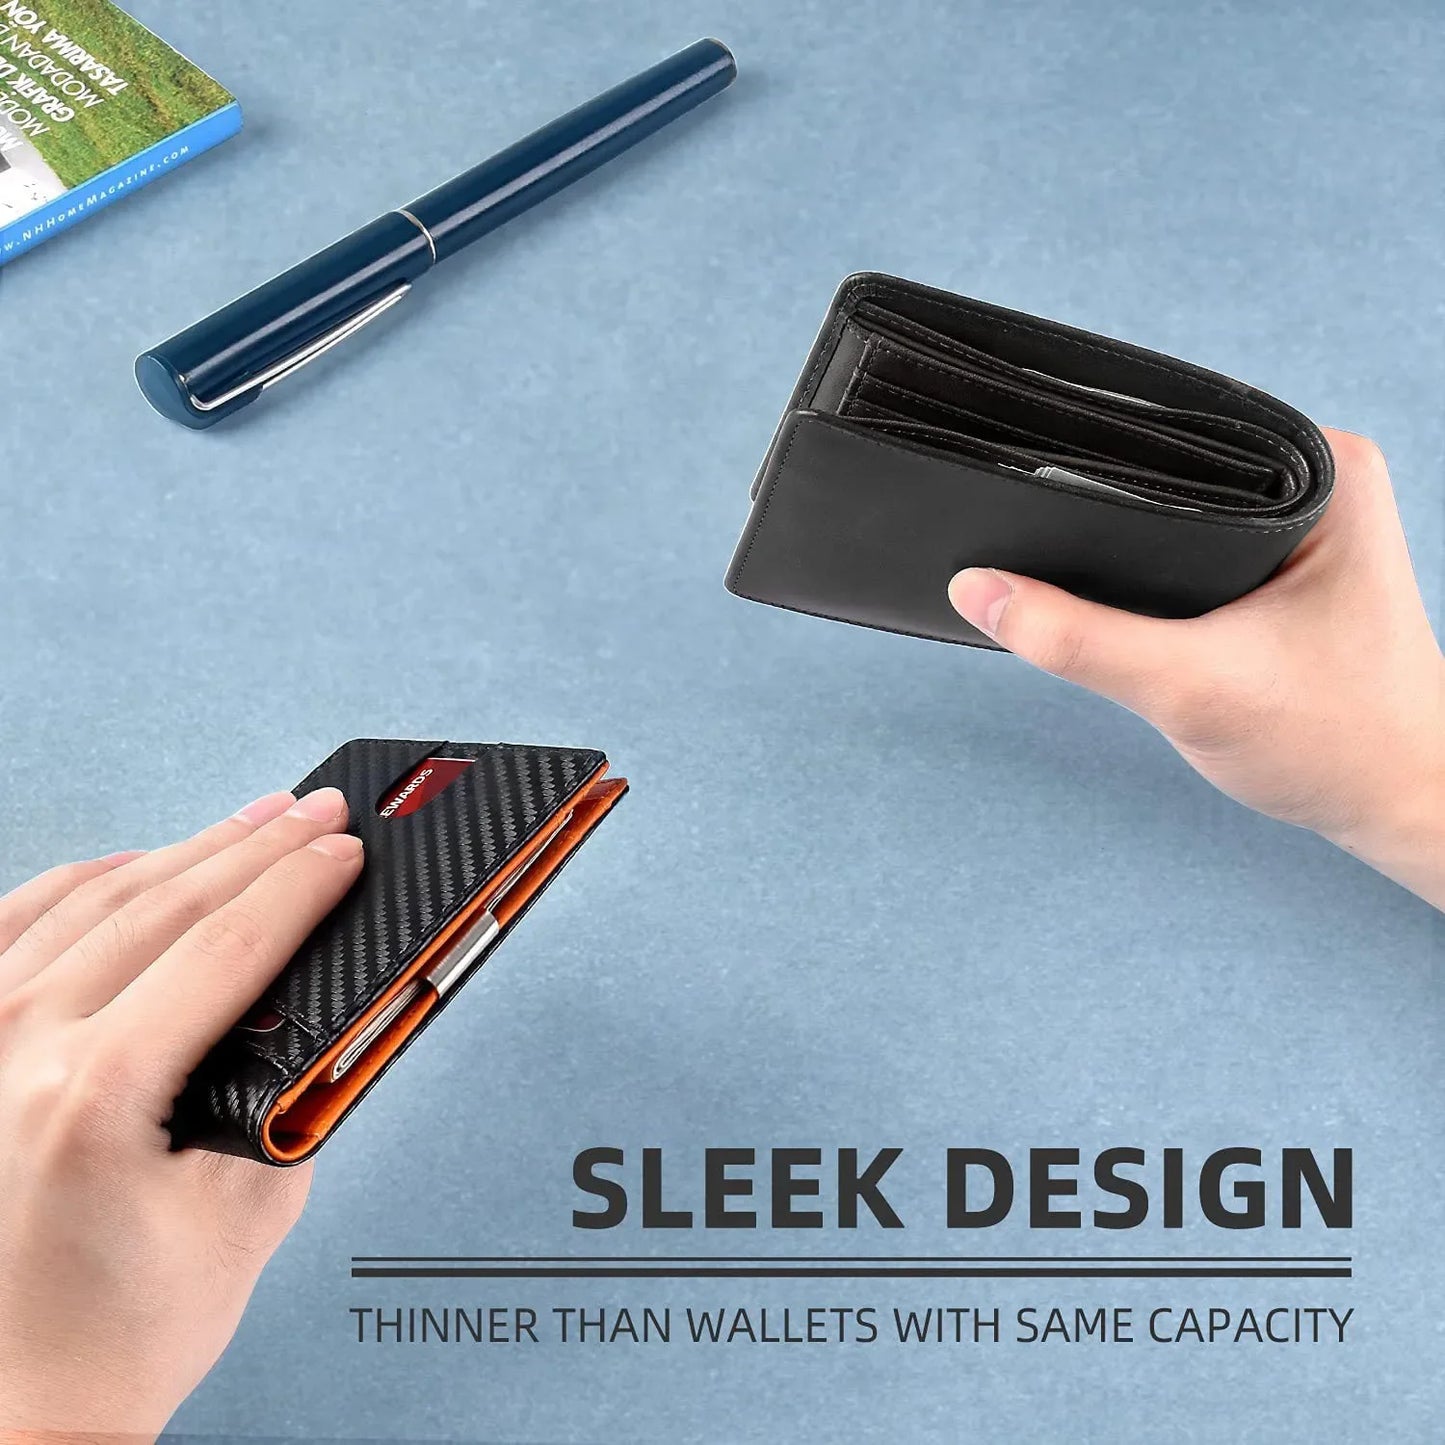 DIENQI synthetic leather Business Card Holder/Wallet